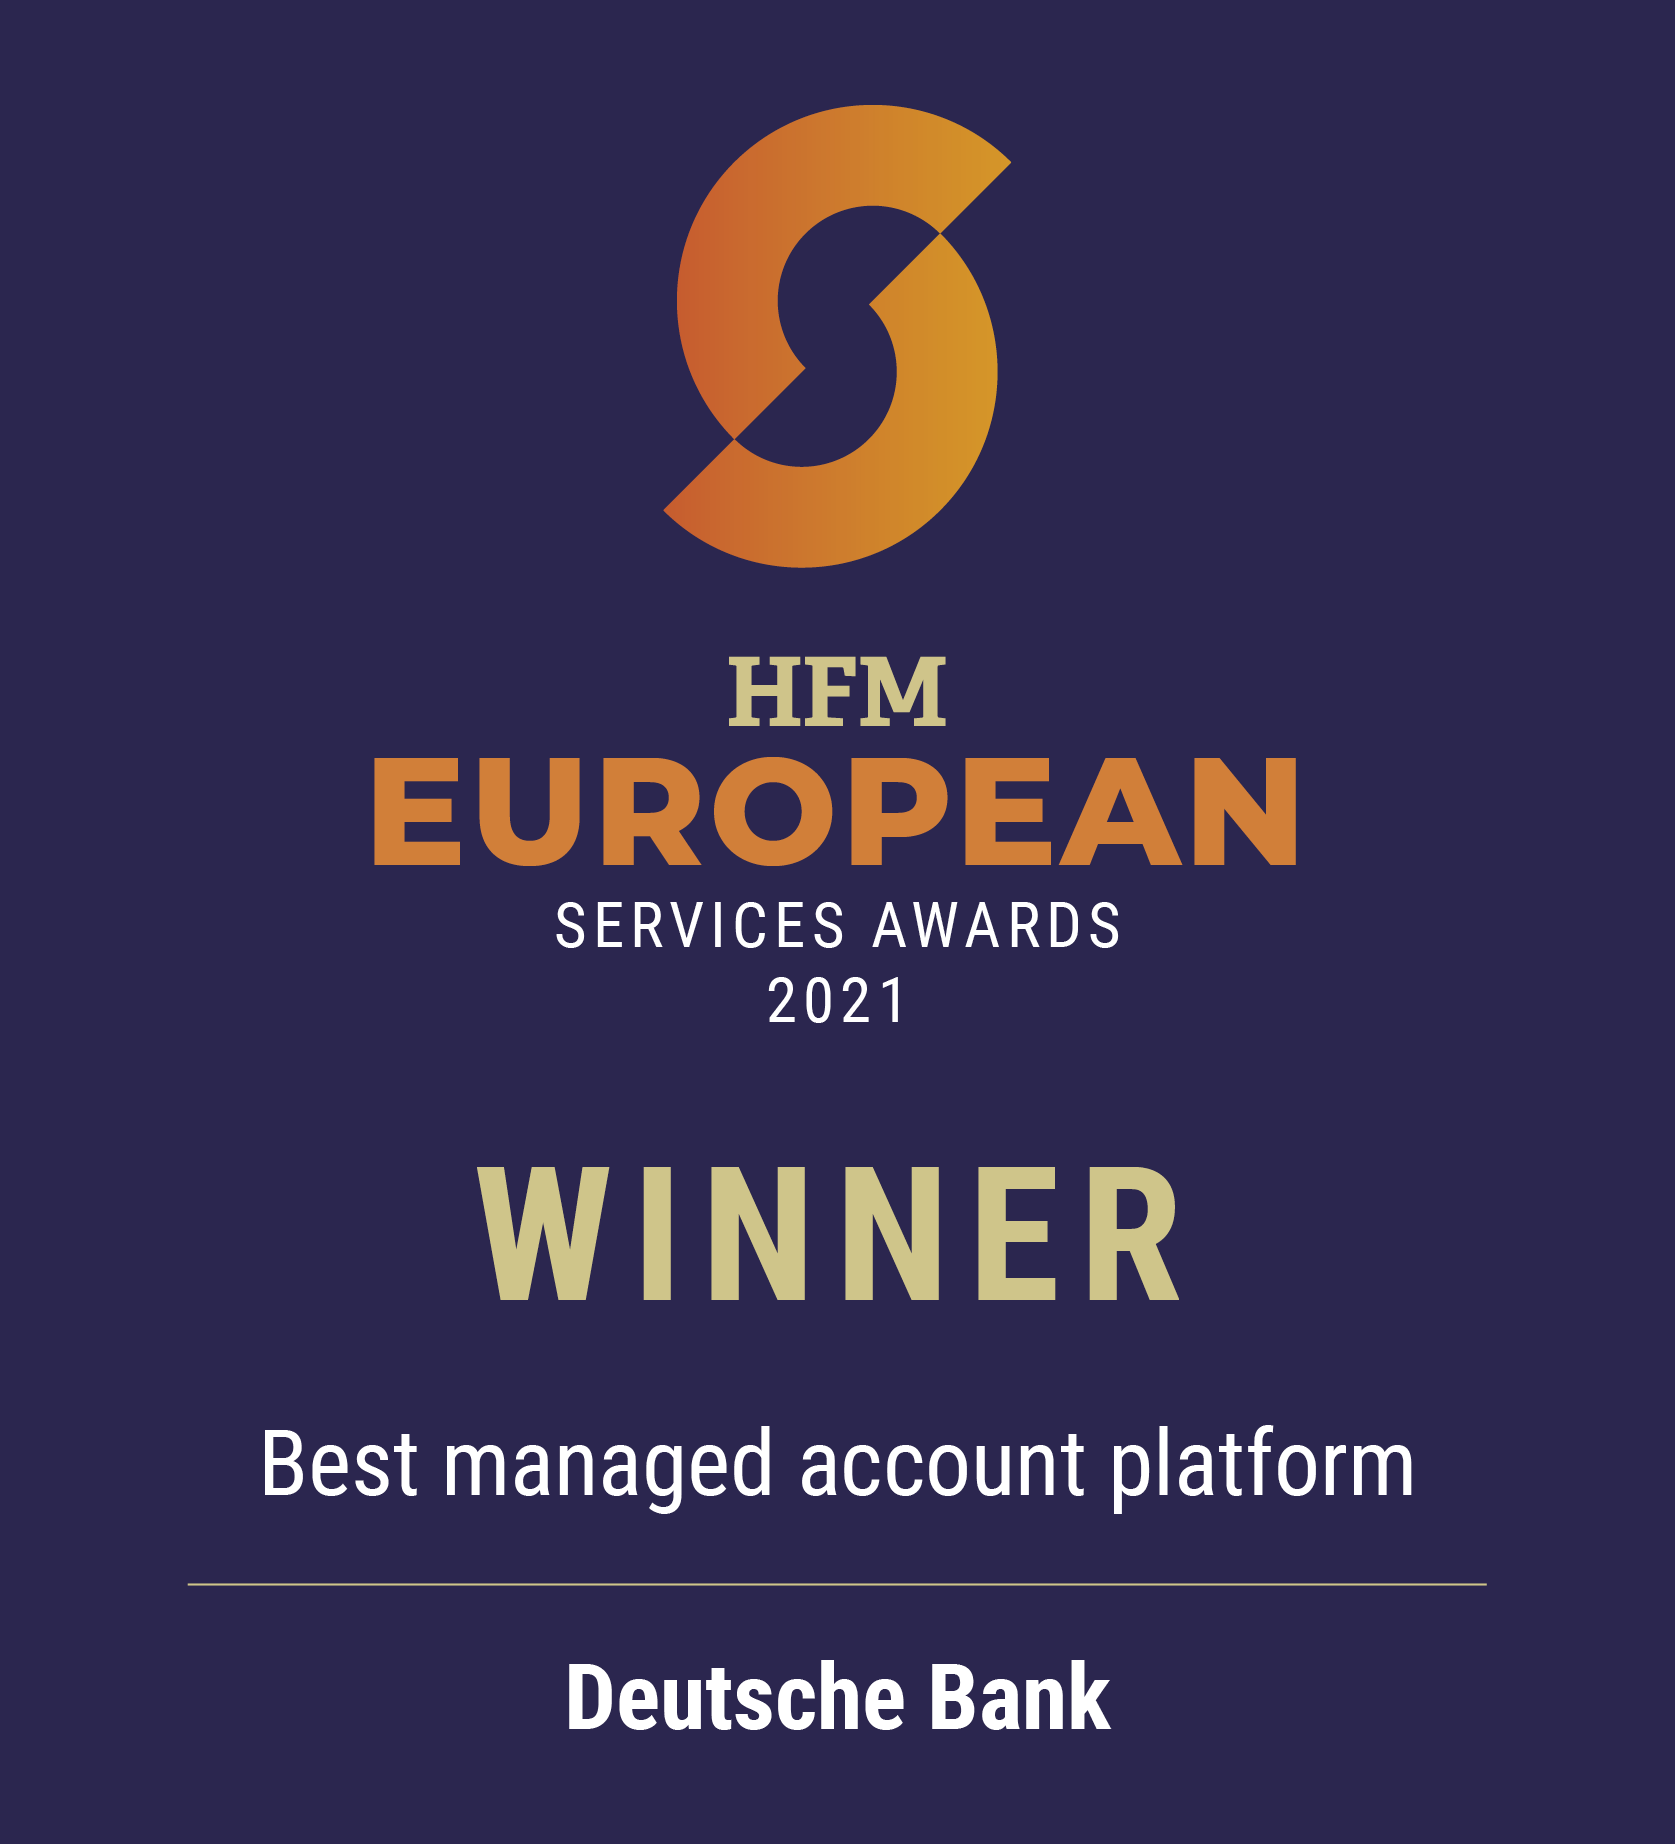 WINNER as a Best managed account platform by HFM European Services Awards 2021